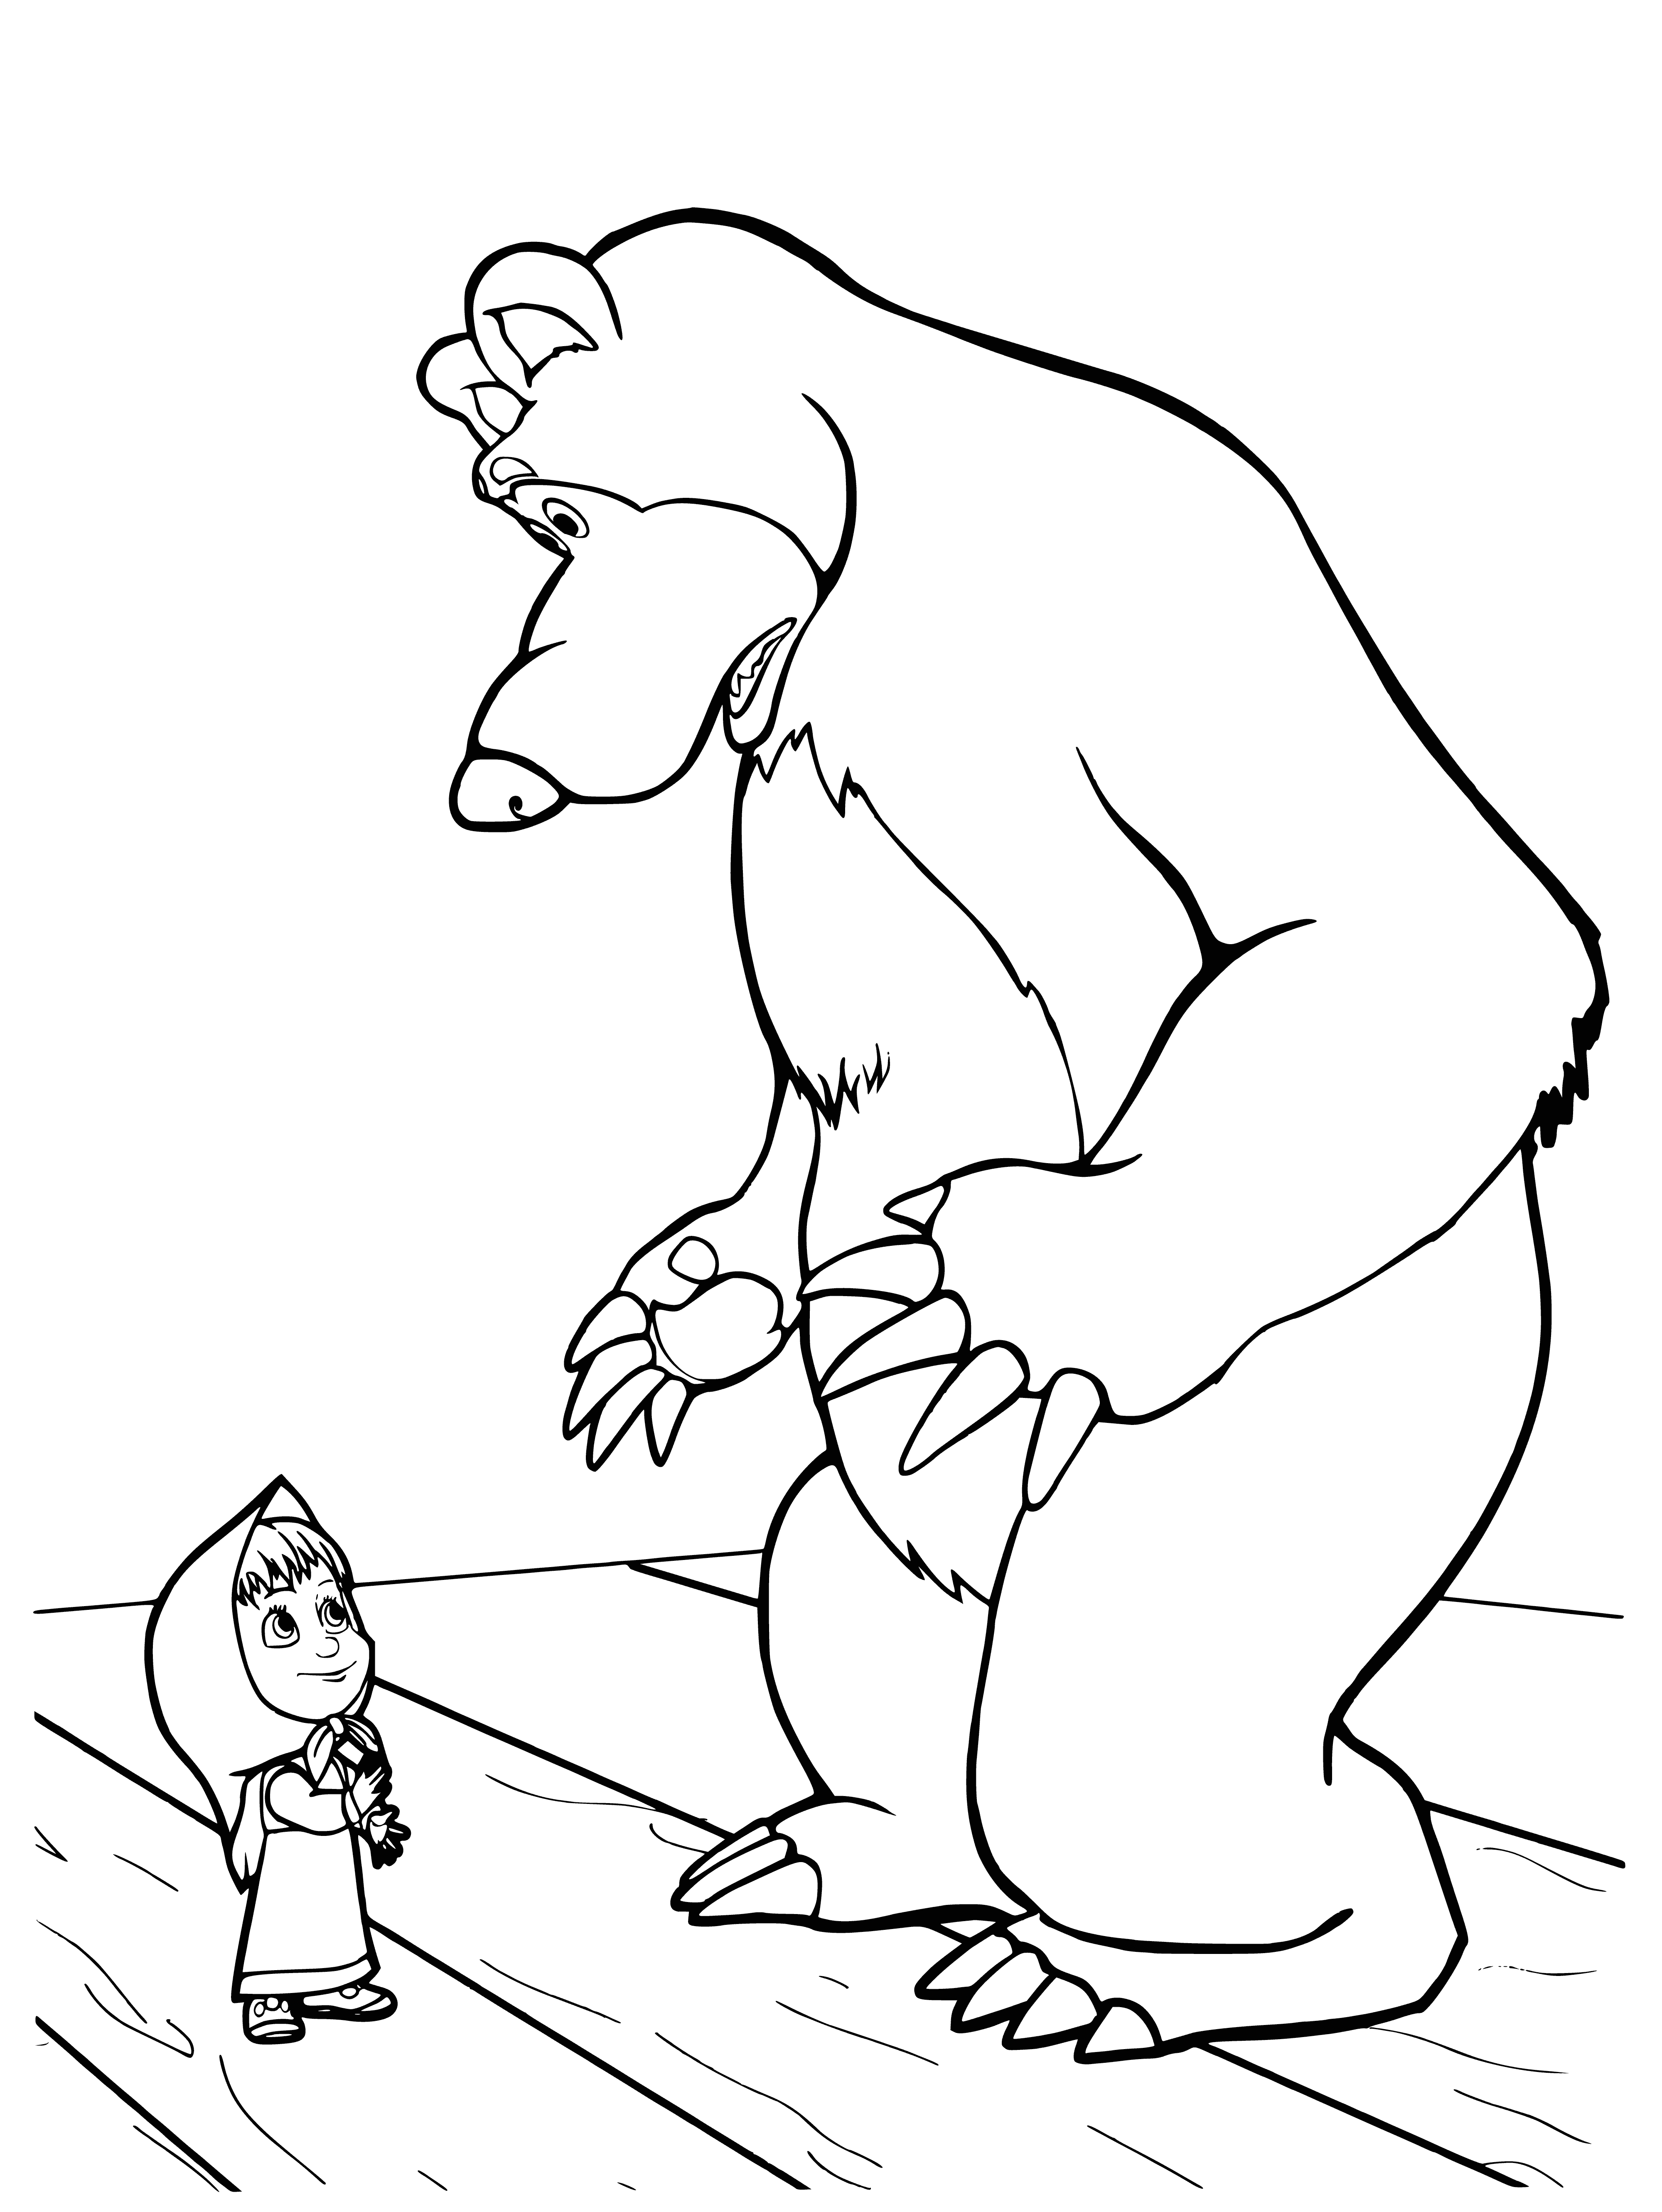 coloring page: Masha plays in the snow with a friendly big bear, having lots of fun.